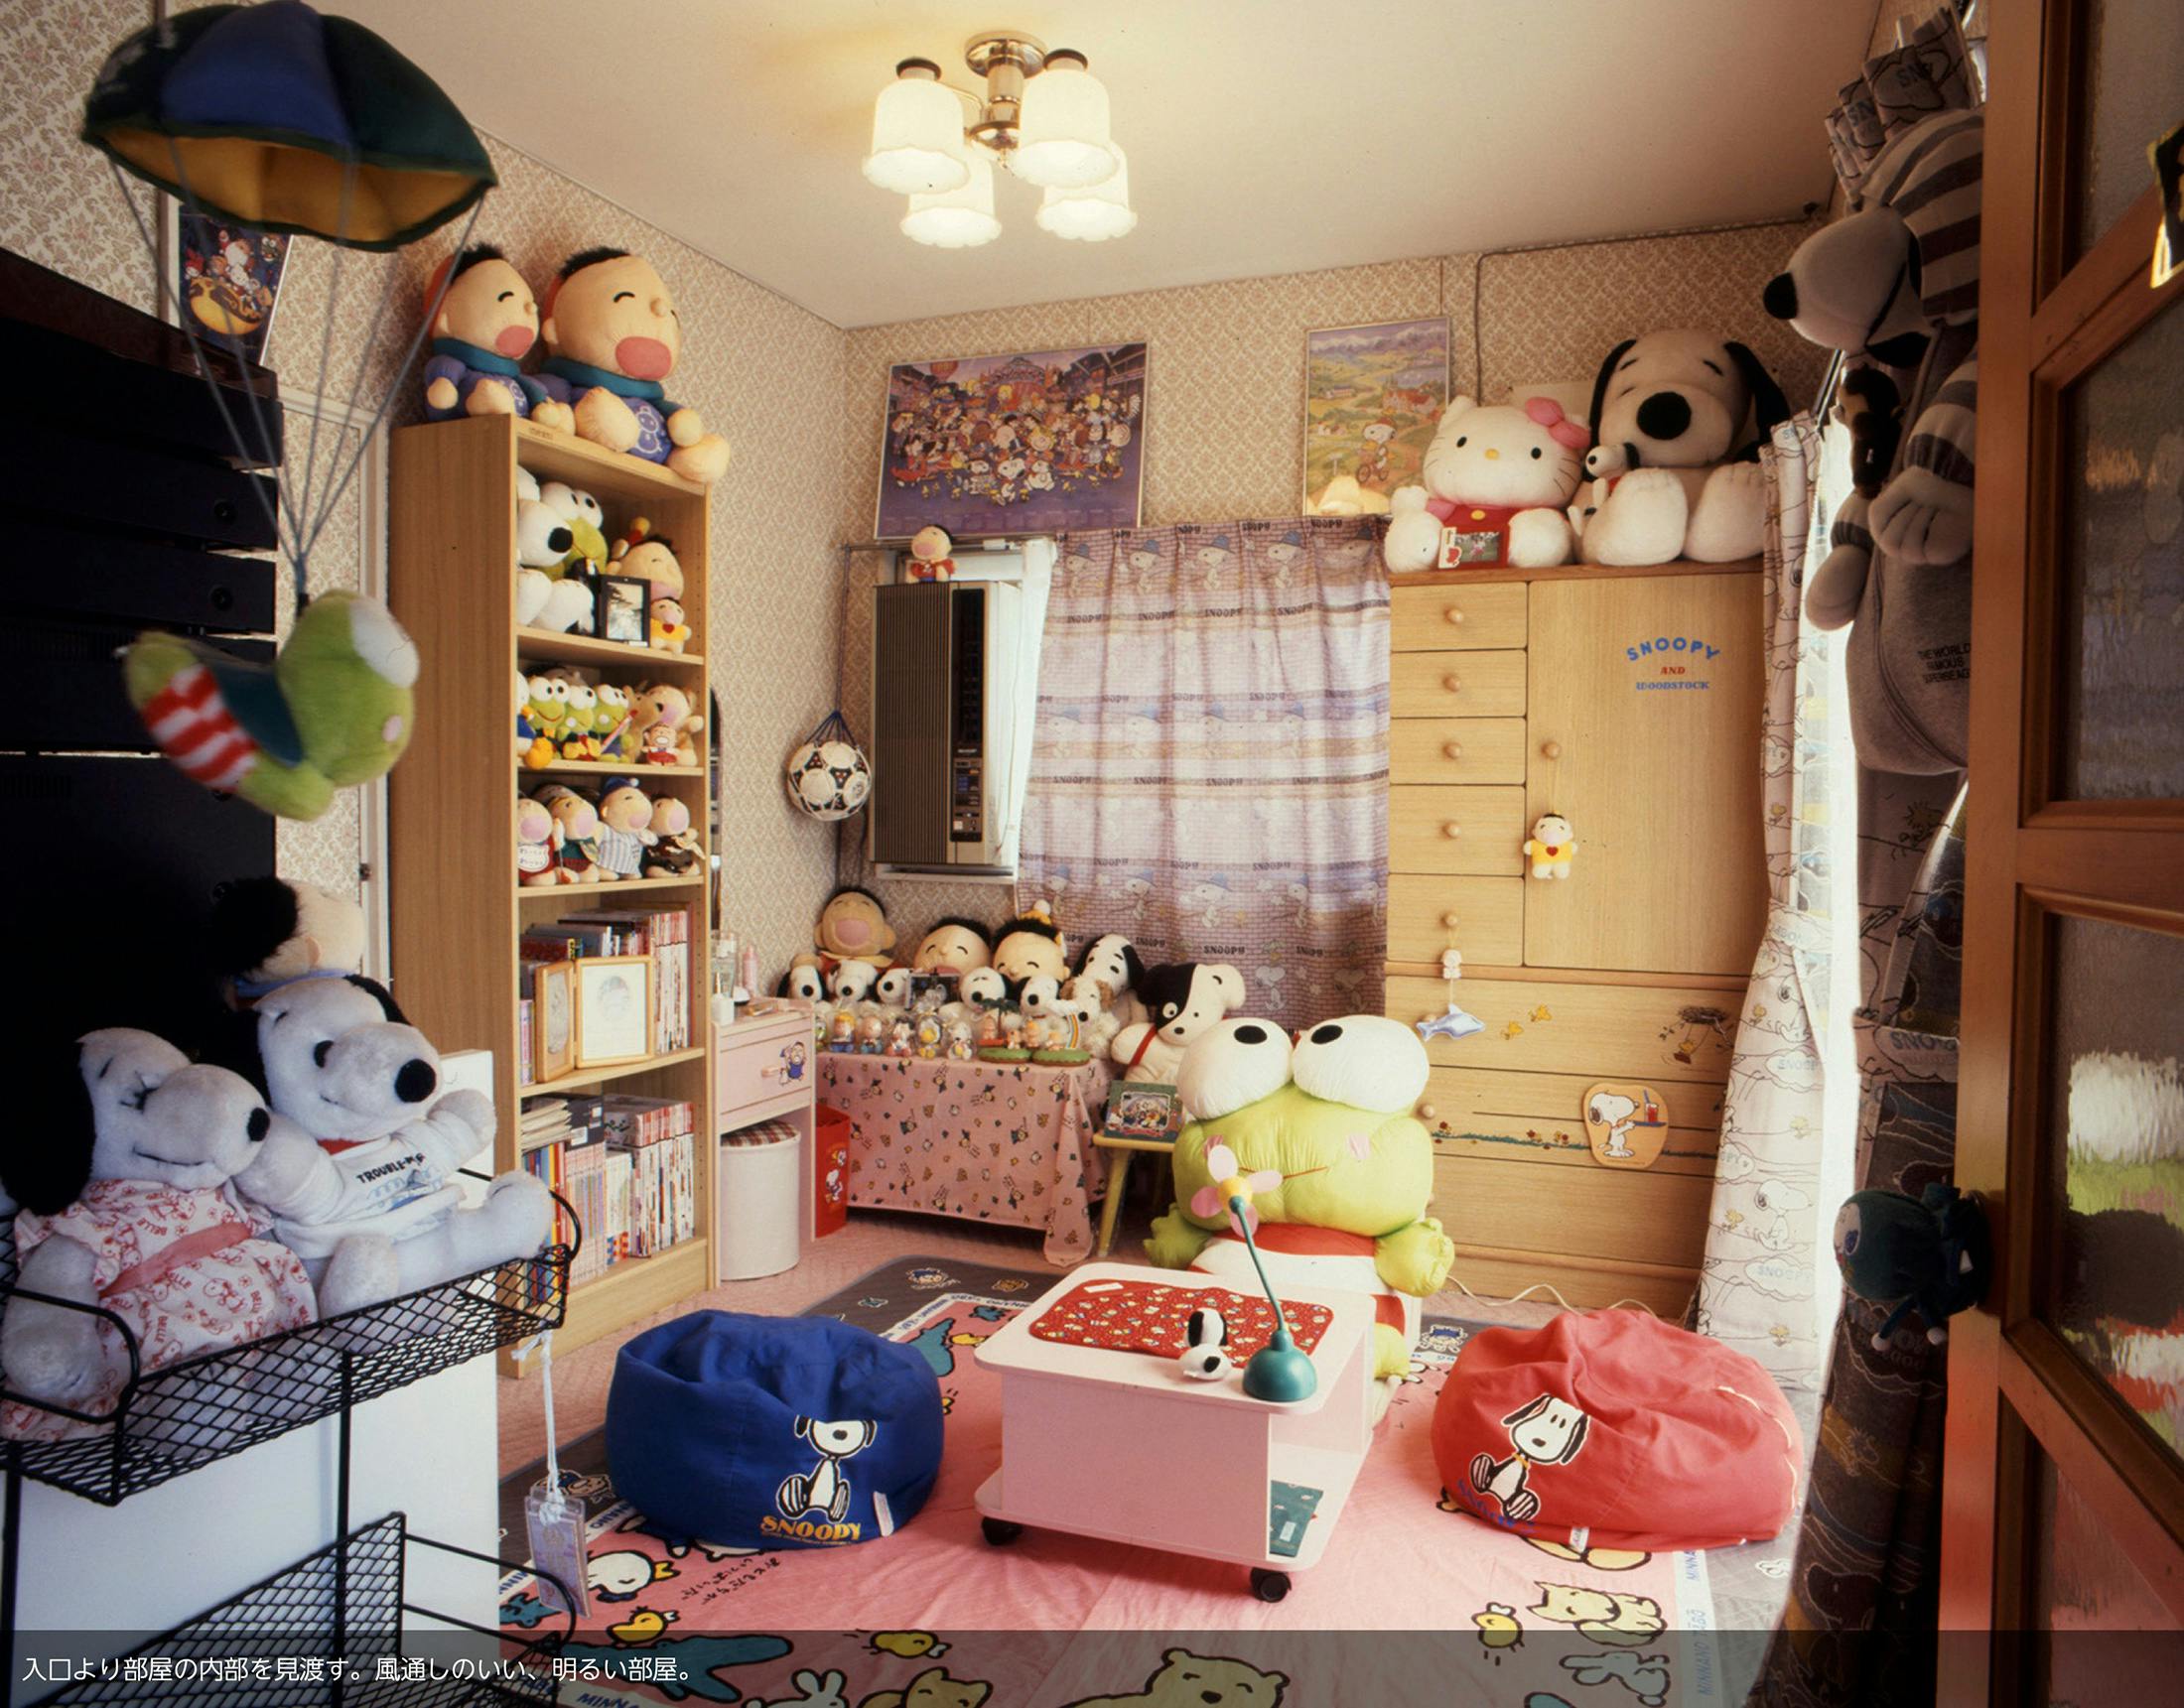 A photograph taken by Kyoichi Tsuzuki from TOKYO STYLE showing a young woman's stuffed animal filled studio apartment